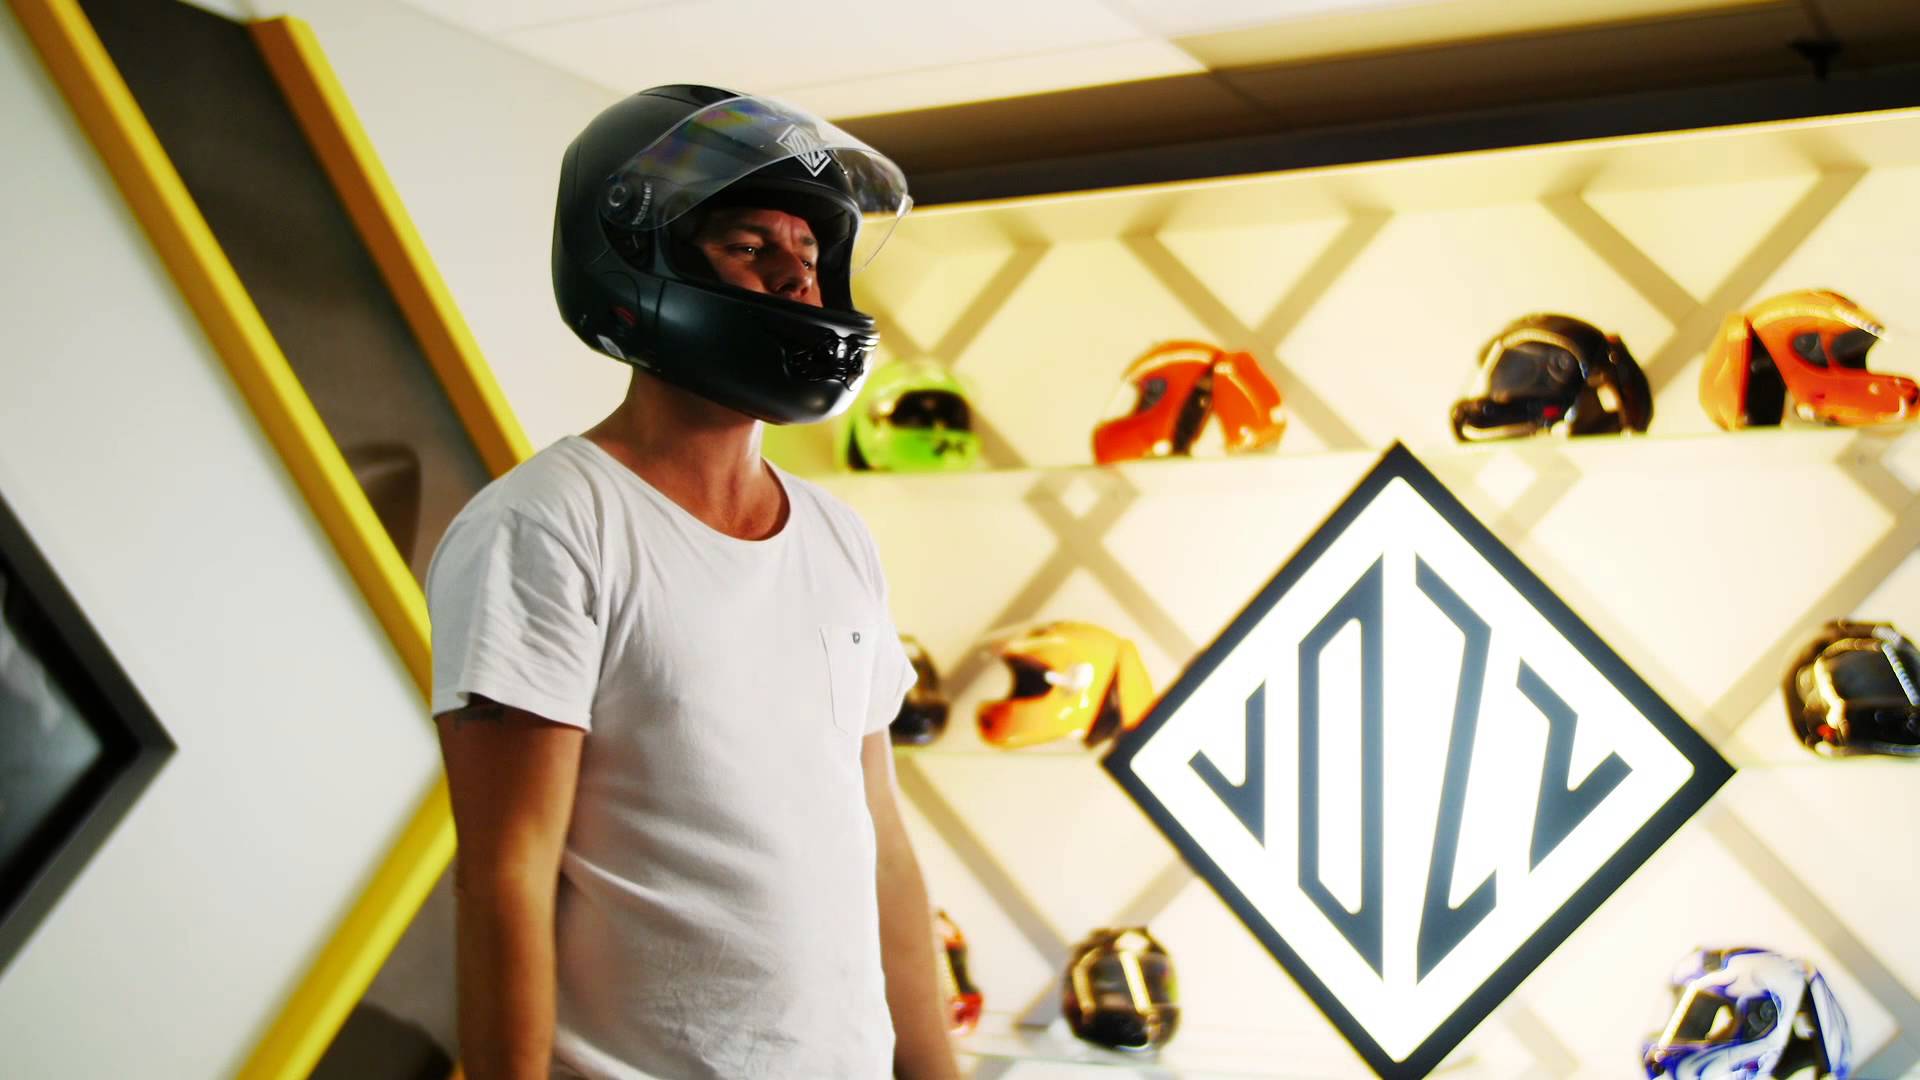 Say Goodbye to Unsafe Motorcycle Helmets, and Hello to the Rear-Access Vozz Helmet